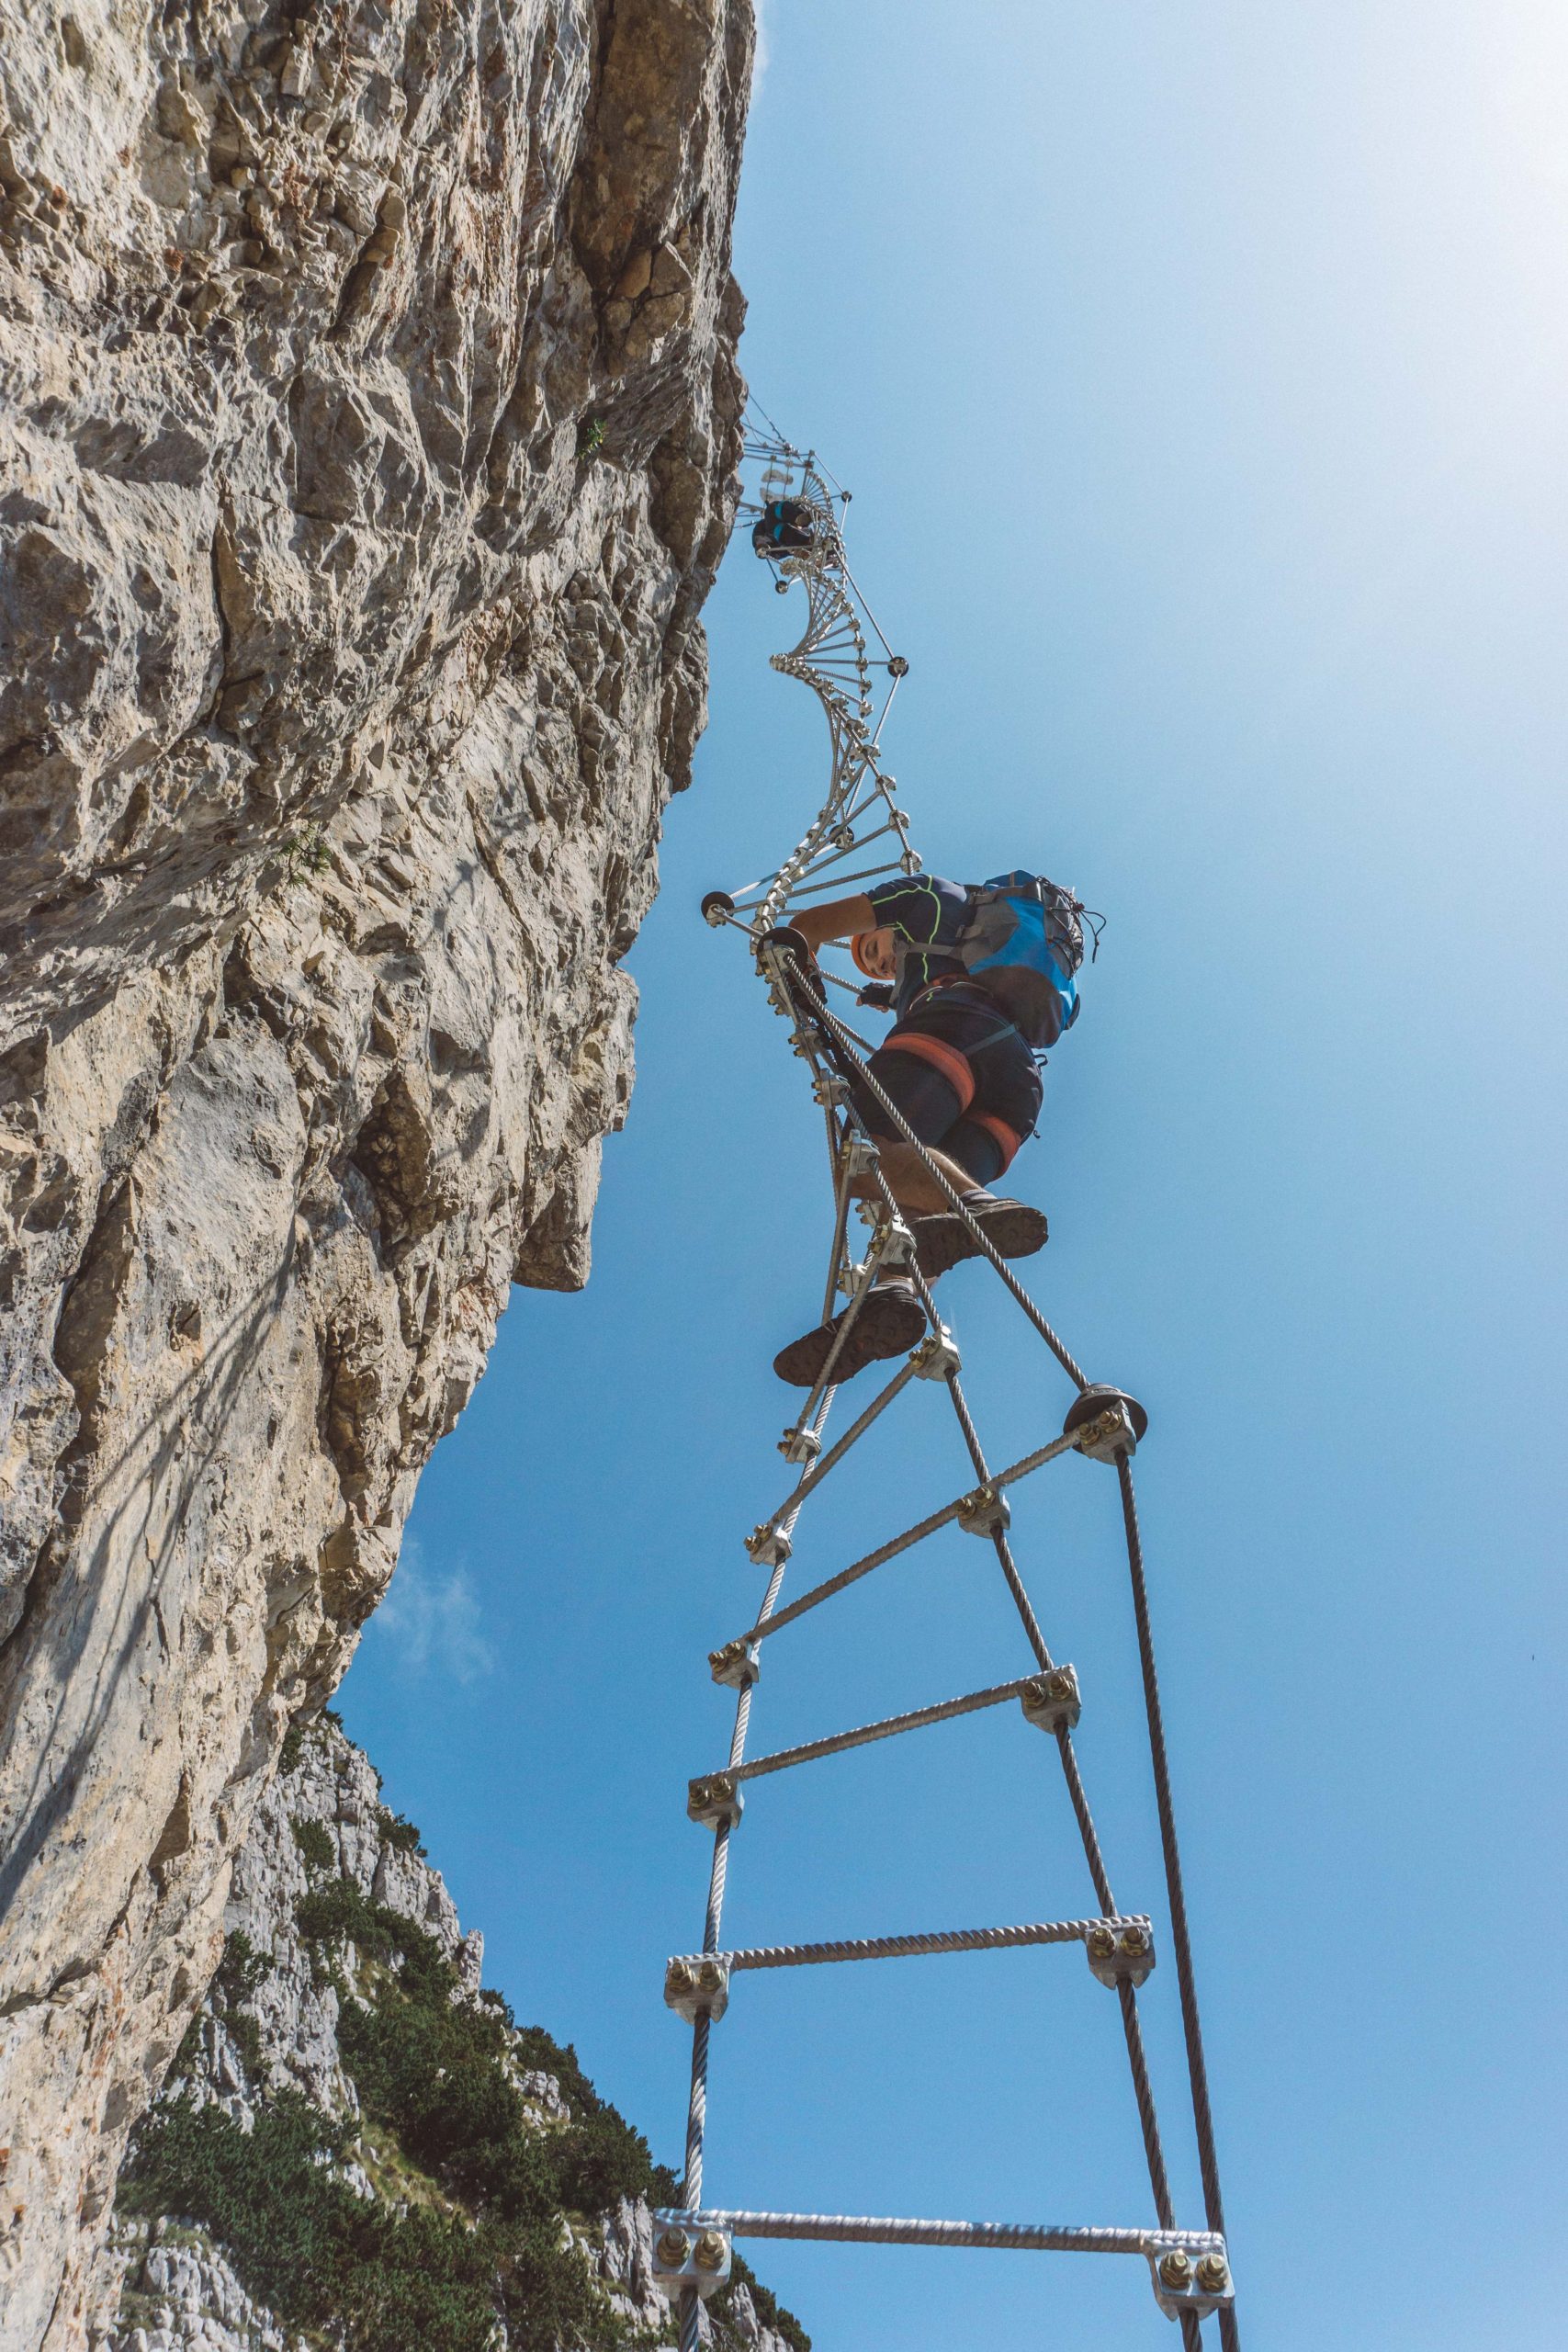 Man climbing rope ladder on course